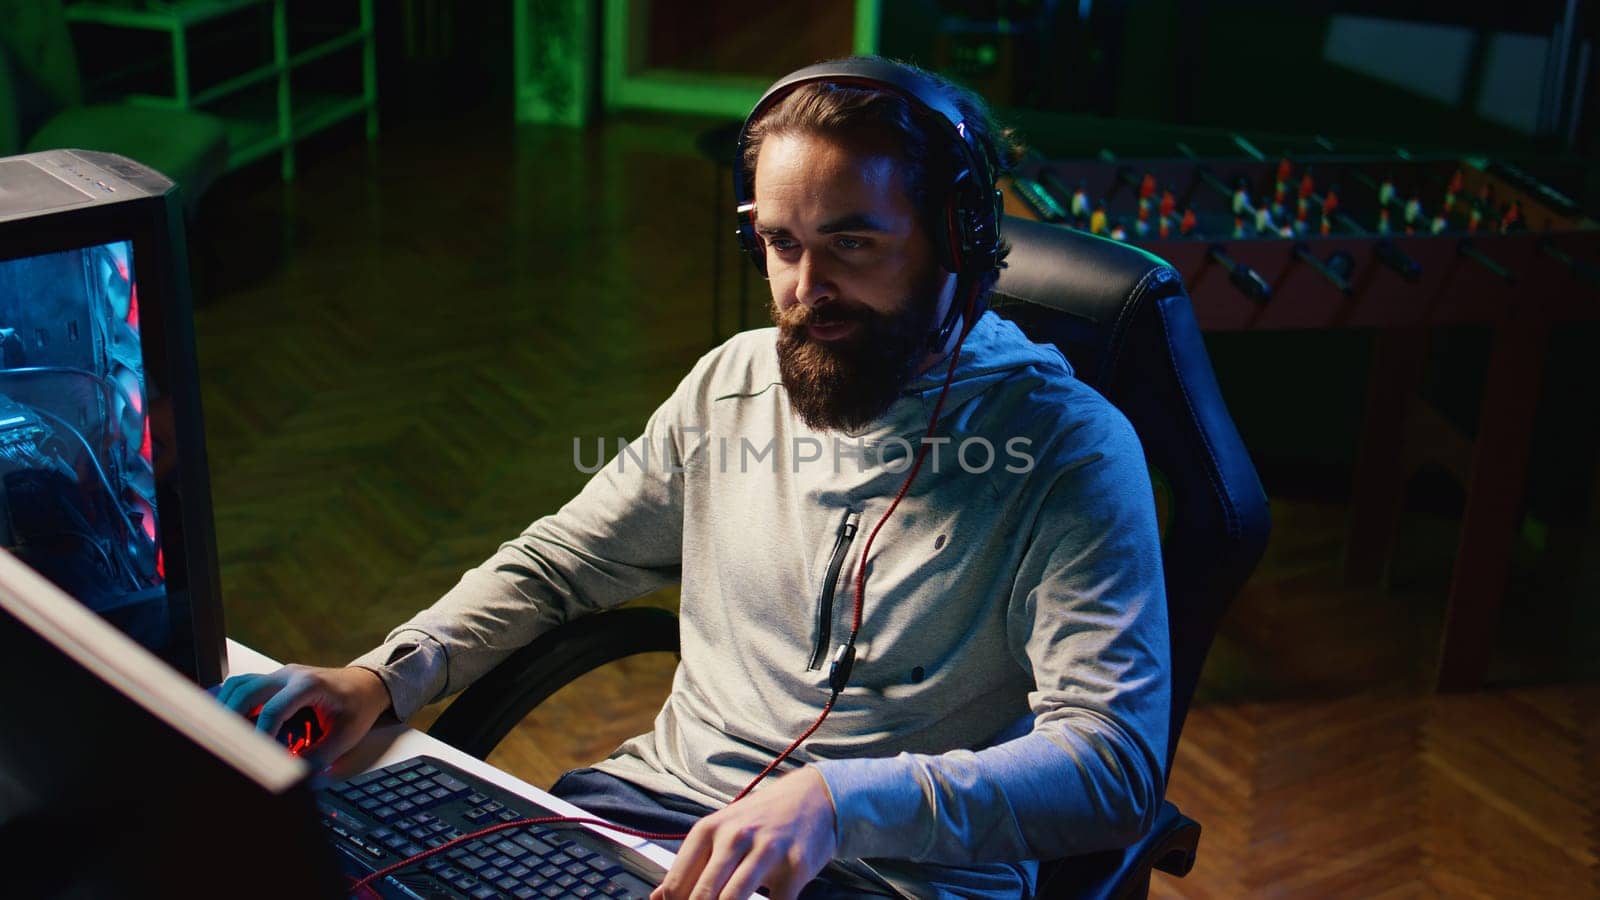 Gamer discussing with teammates while playing competitive esports tournament, finding best strategy. Player spending time together with friends in videogame, communicating through headset mic